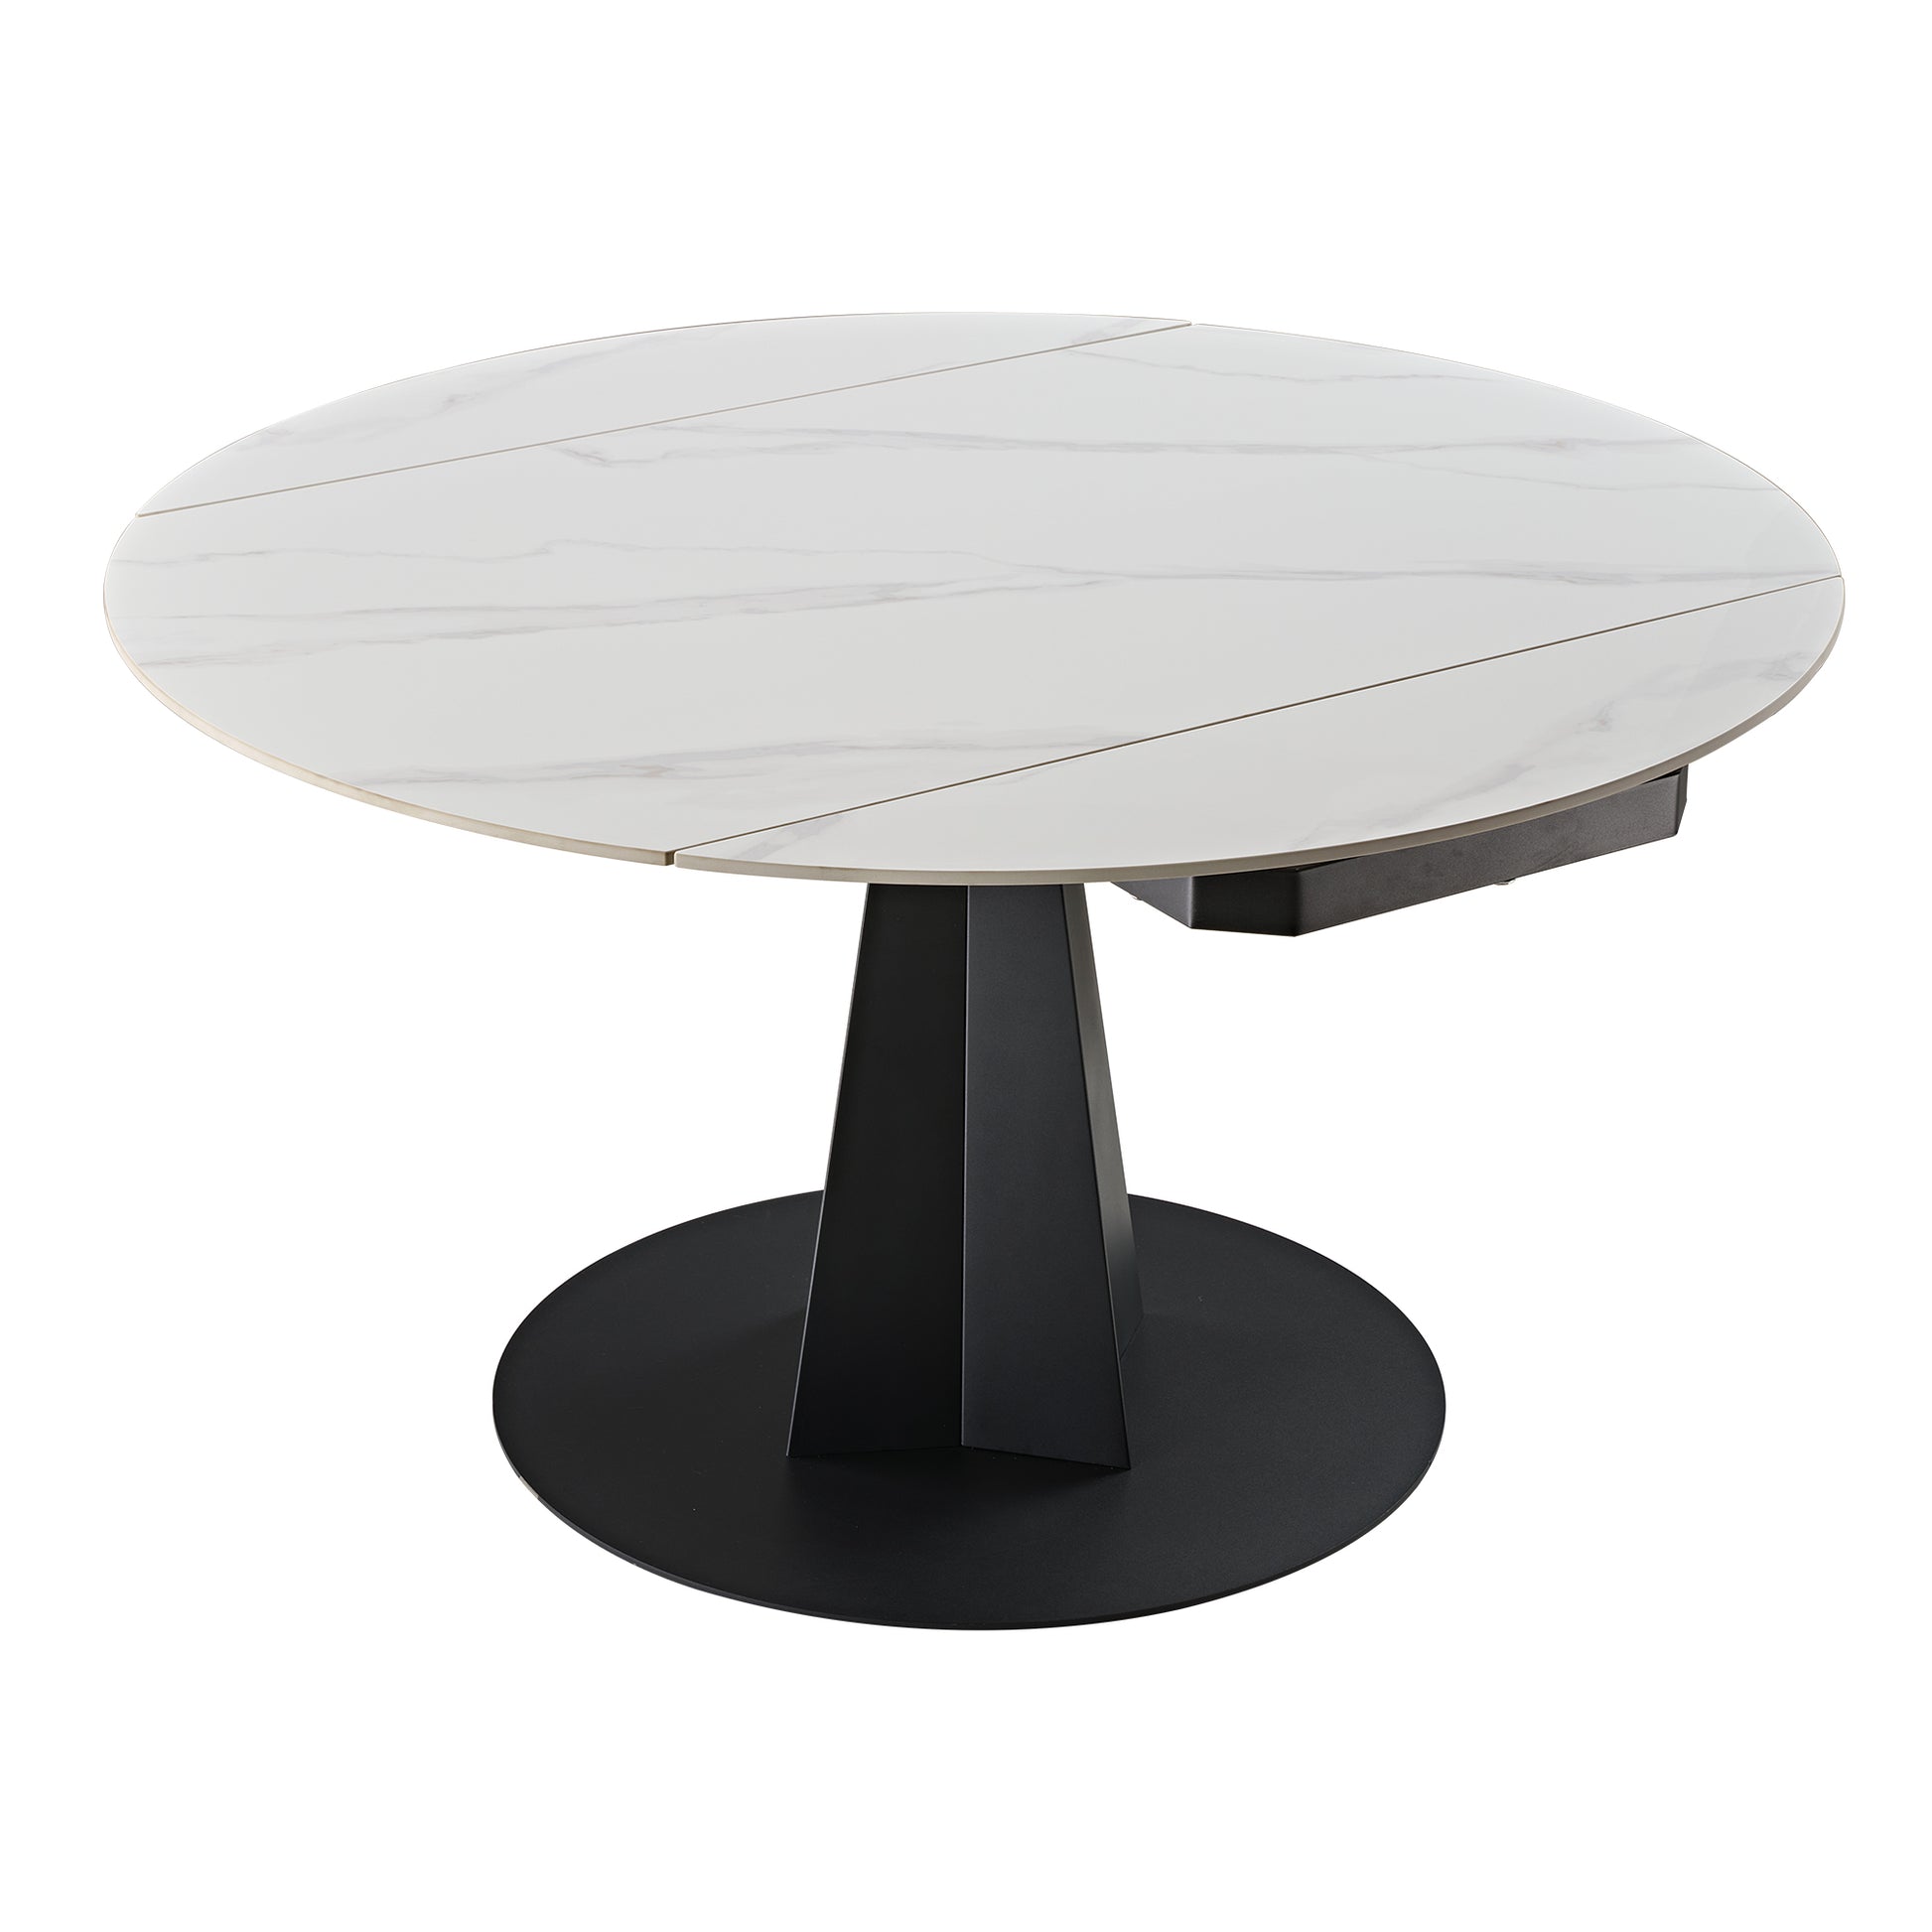 53 inch White Round Extending Dining Table with Black Base, white product image